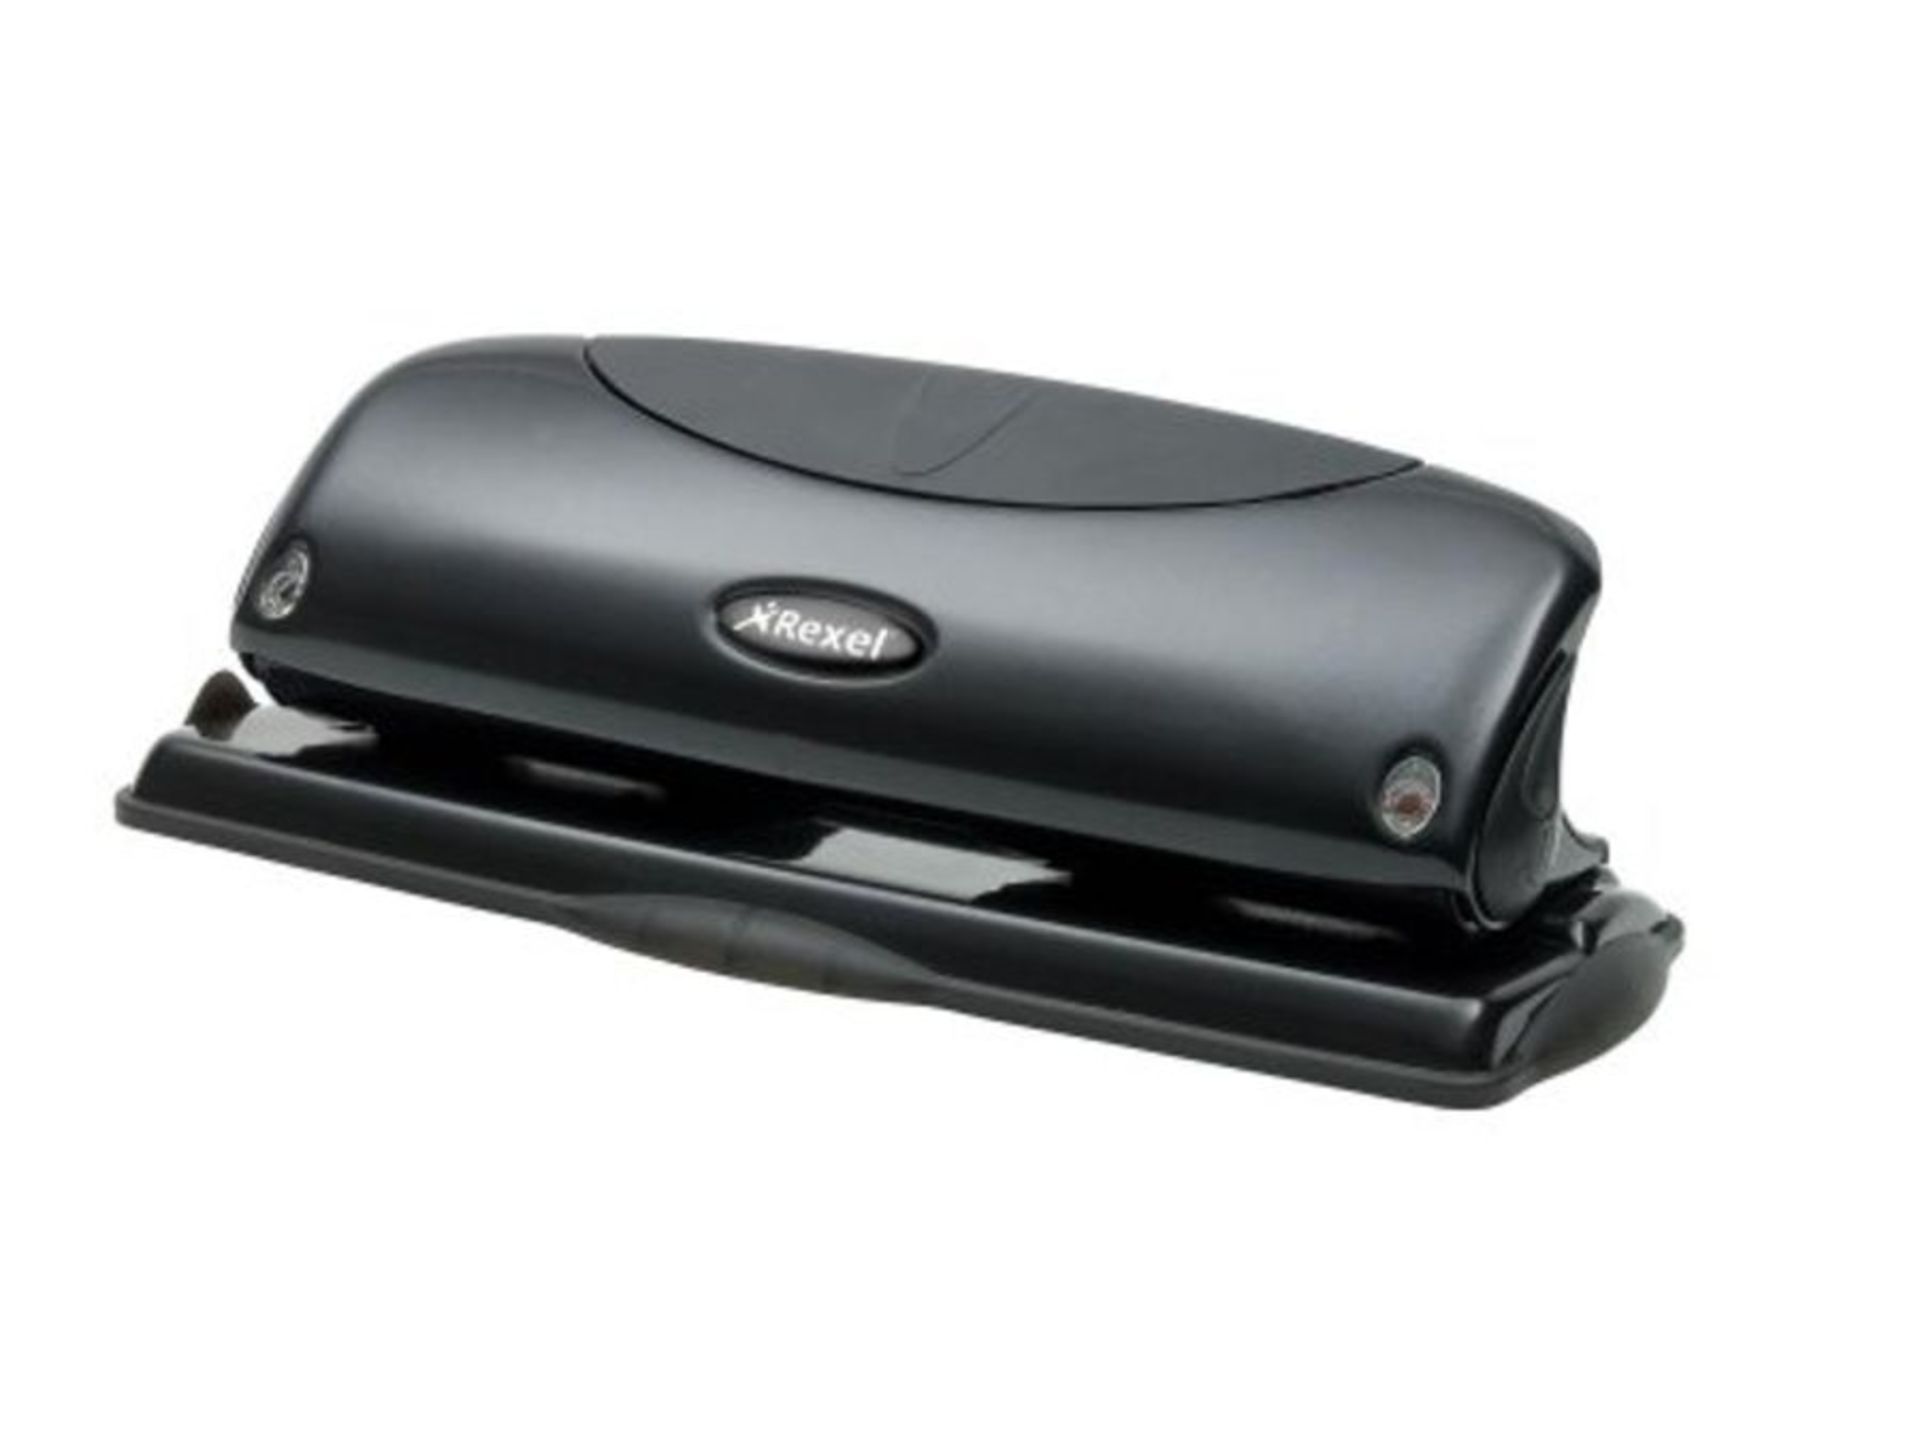 [CRACKED] Rexel Precision 425 4 Hole Punch, 25 Sheet Capacity, Paper Alignment Indicat